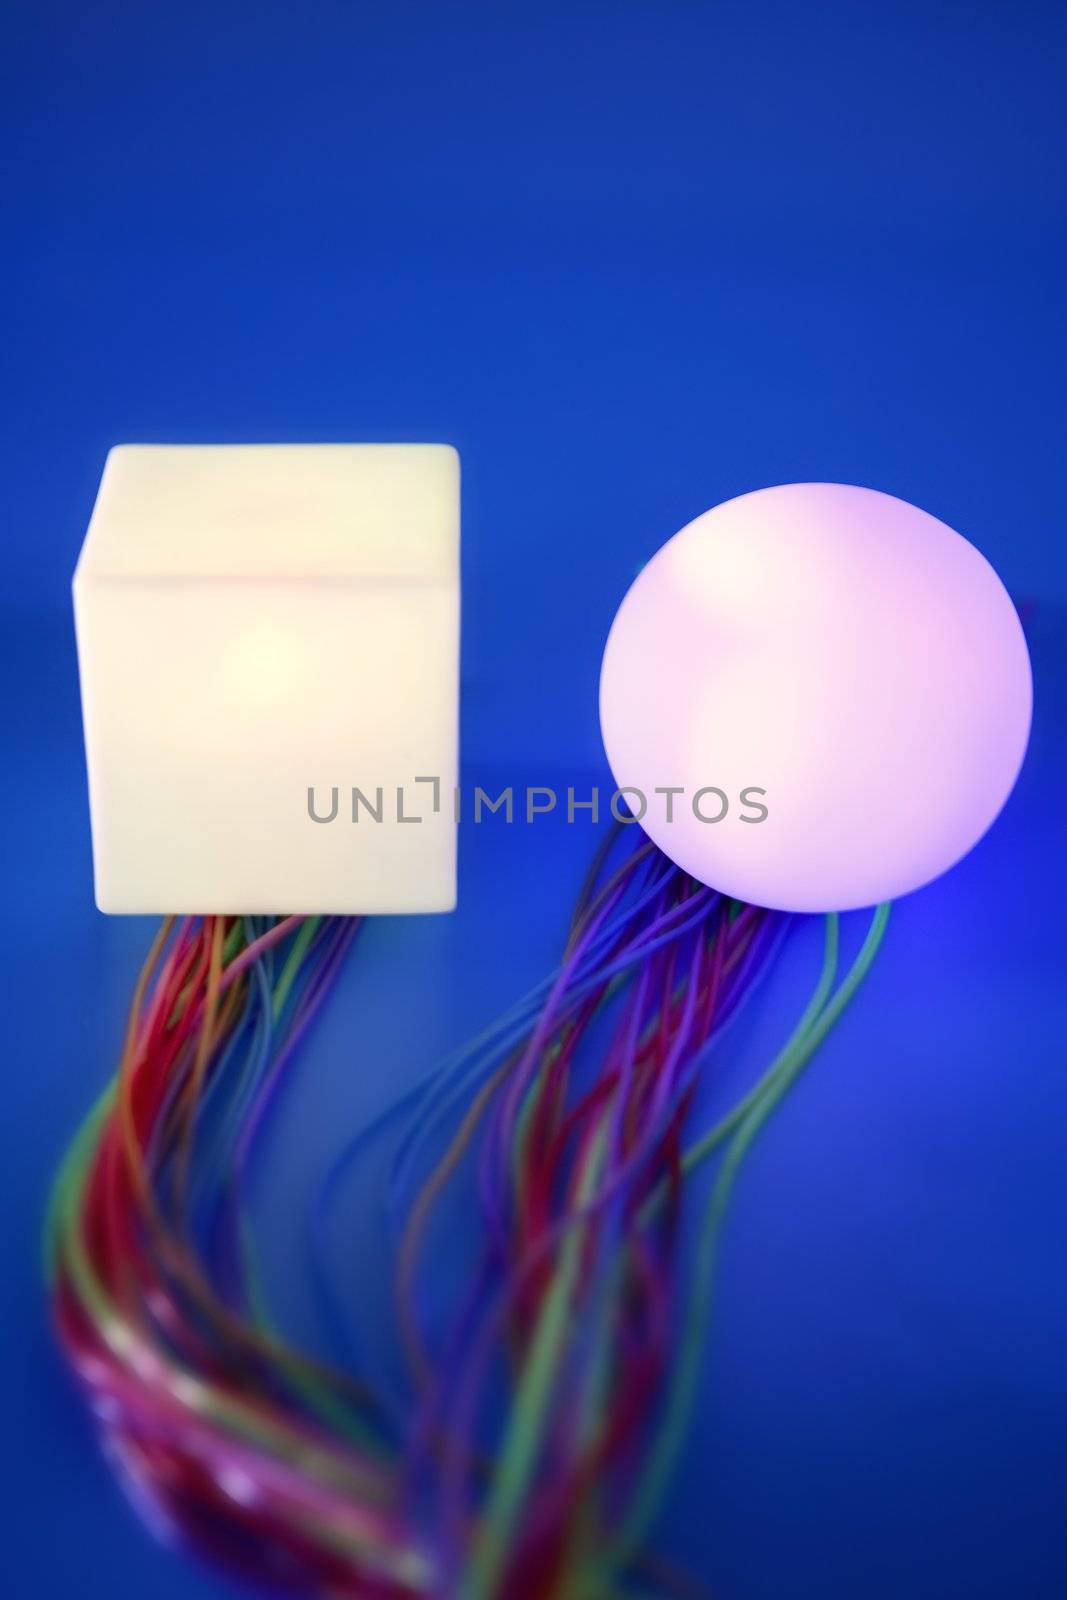 Glowing sphere and square with colorful wires, wired communication metaphor